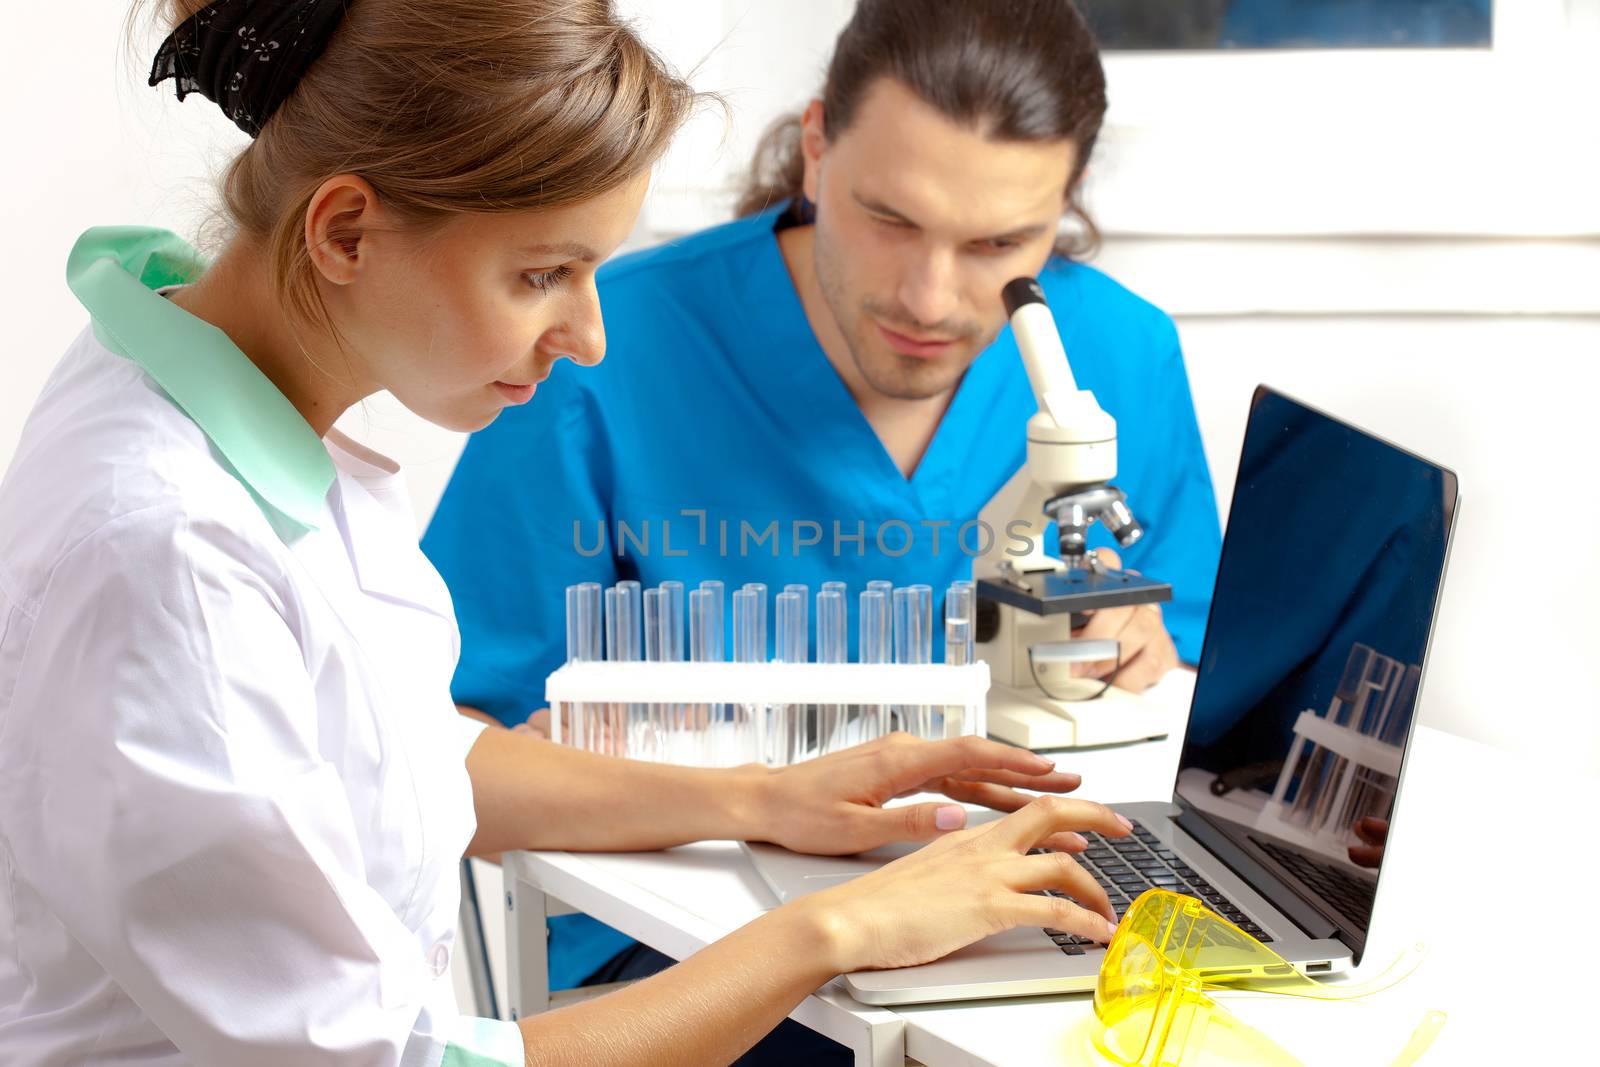 Doctor enters data into the computer, a researcher looking through a microscope in the background